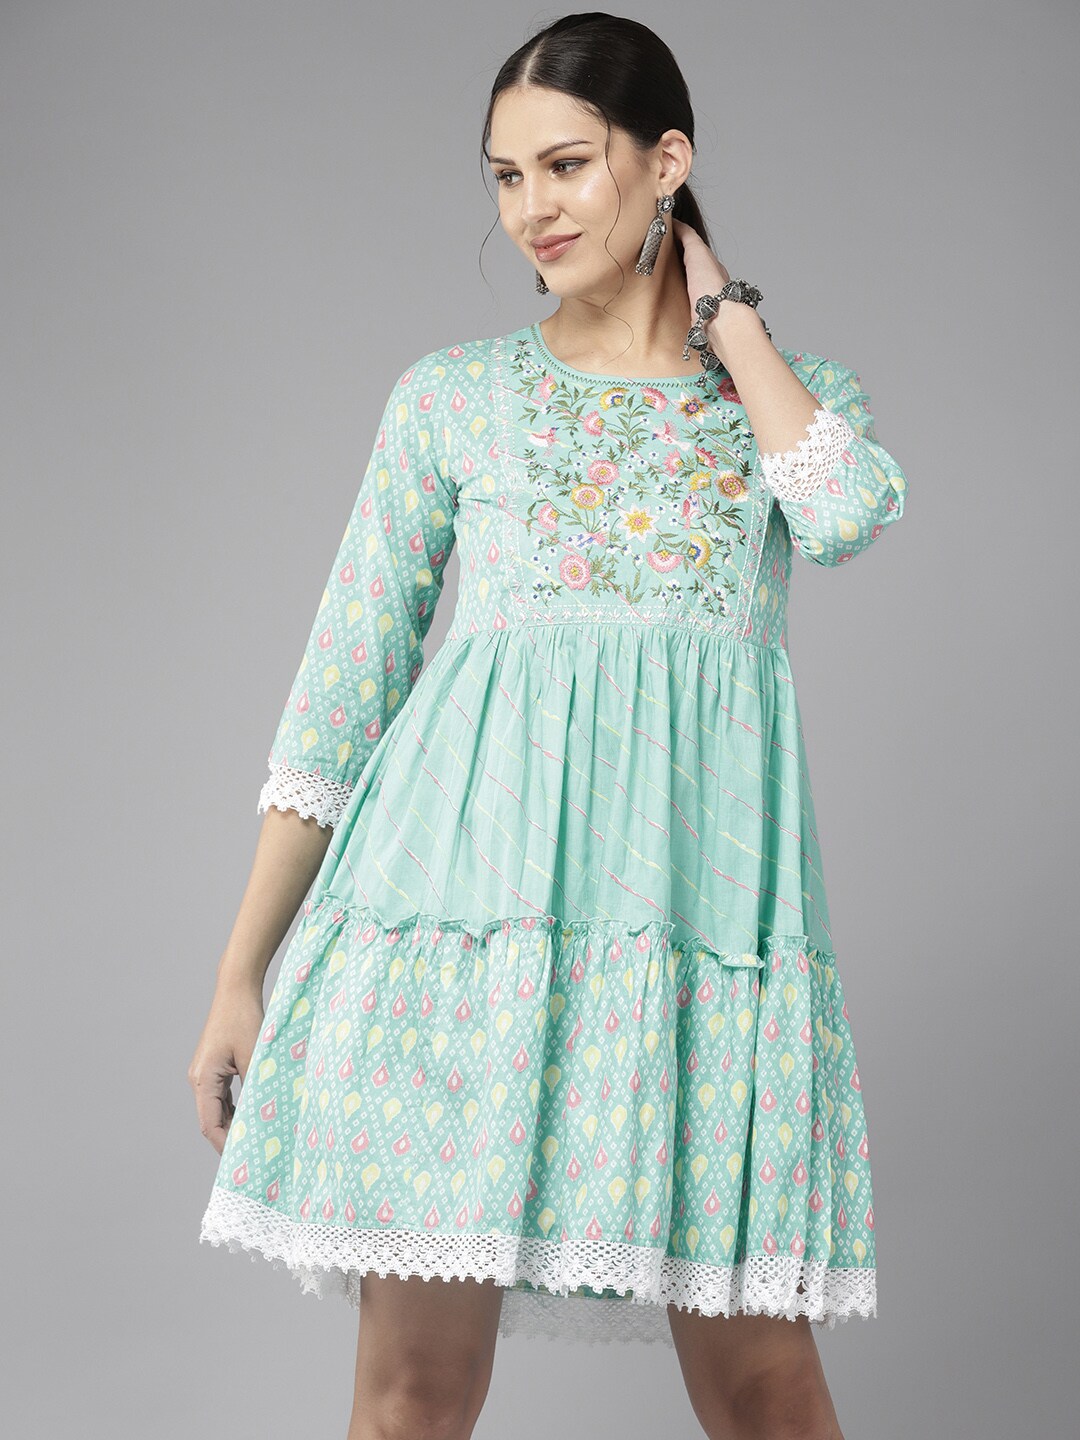 Yufta Floral Embroidered Cotton A-Line Dress Price in India